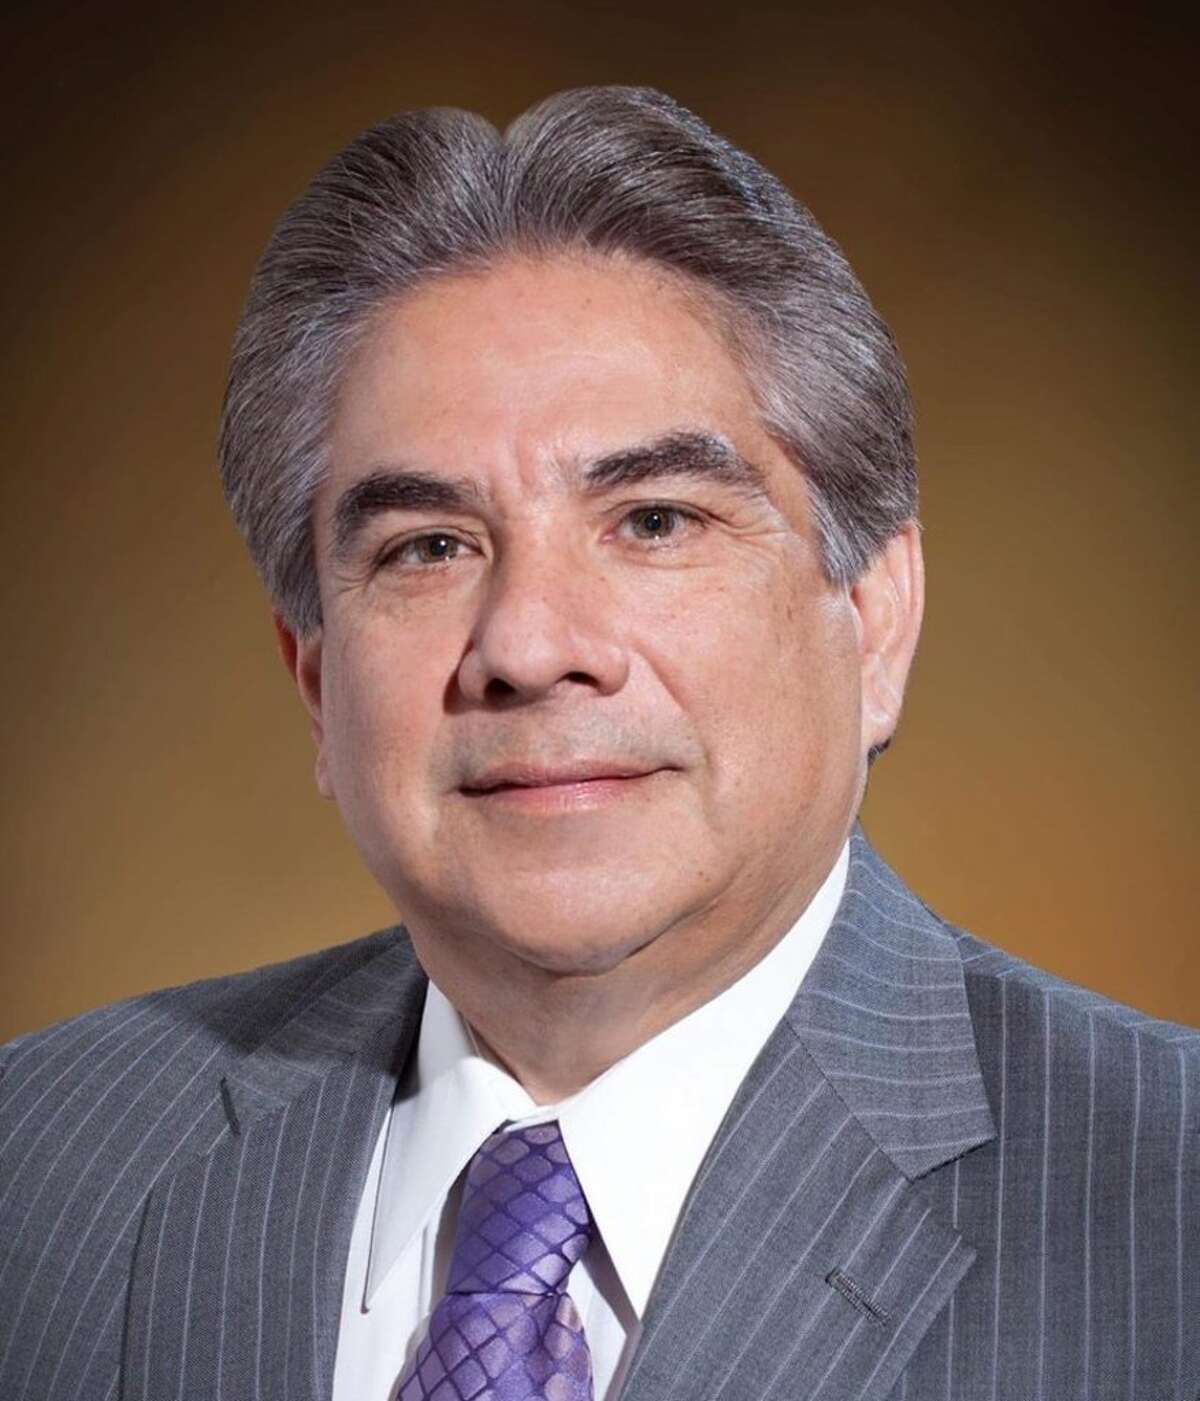 Former Webb County Judge Danny Valdez may file a lawsuit against the Texas Democratic Party after his paperwork was sent to the wrong address, which kept his name from appearing on the ballot.